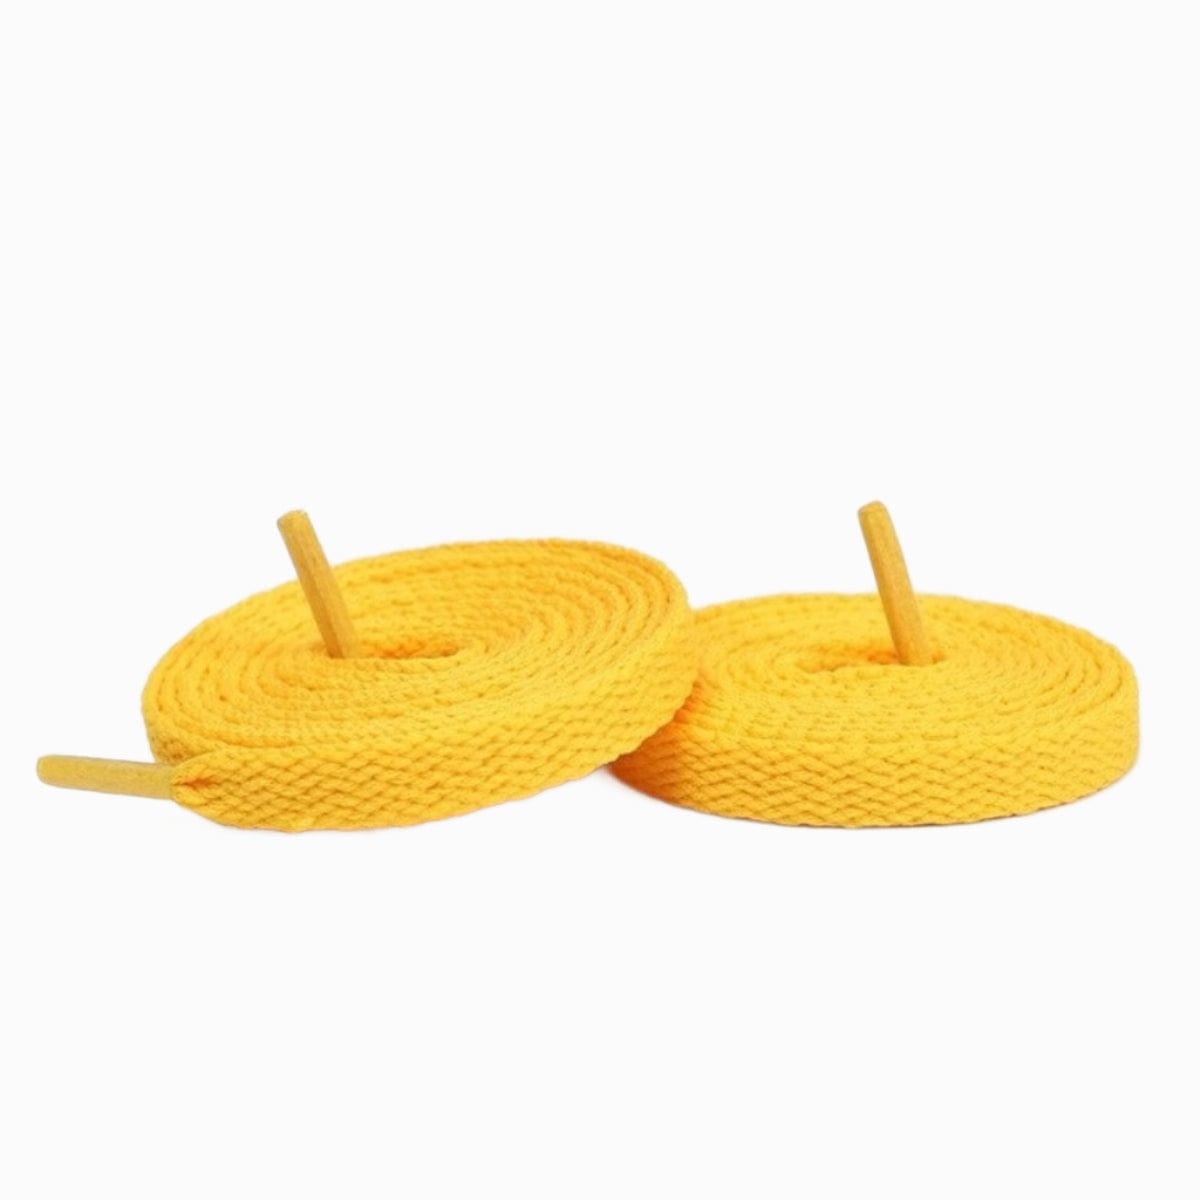 Golden Yellow Replacement Adidas Shoe Laces for Adidas Handball Spezial Sneakers by Kicks Shoelaces